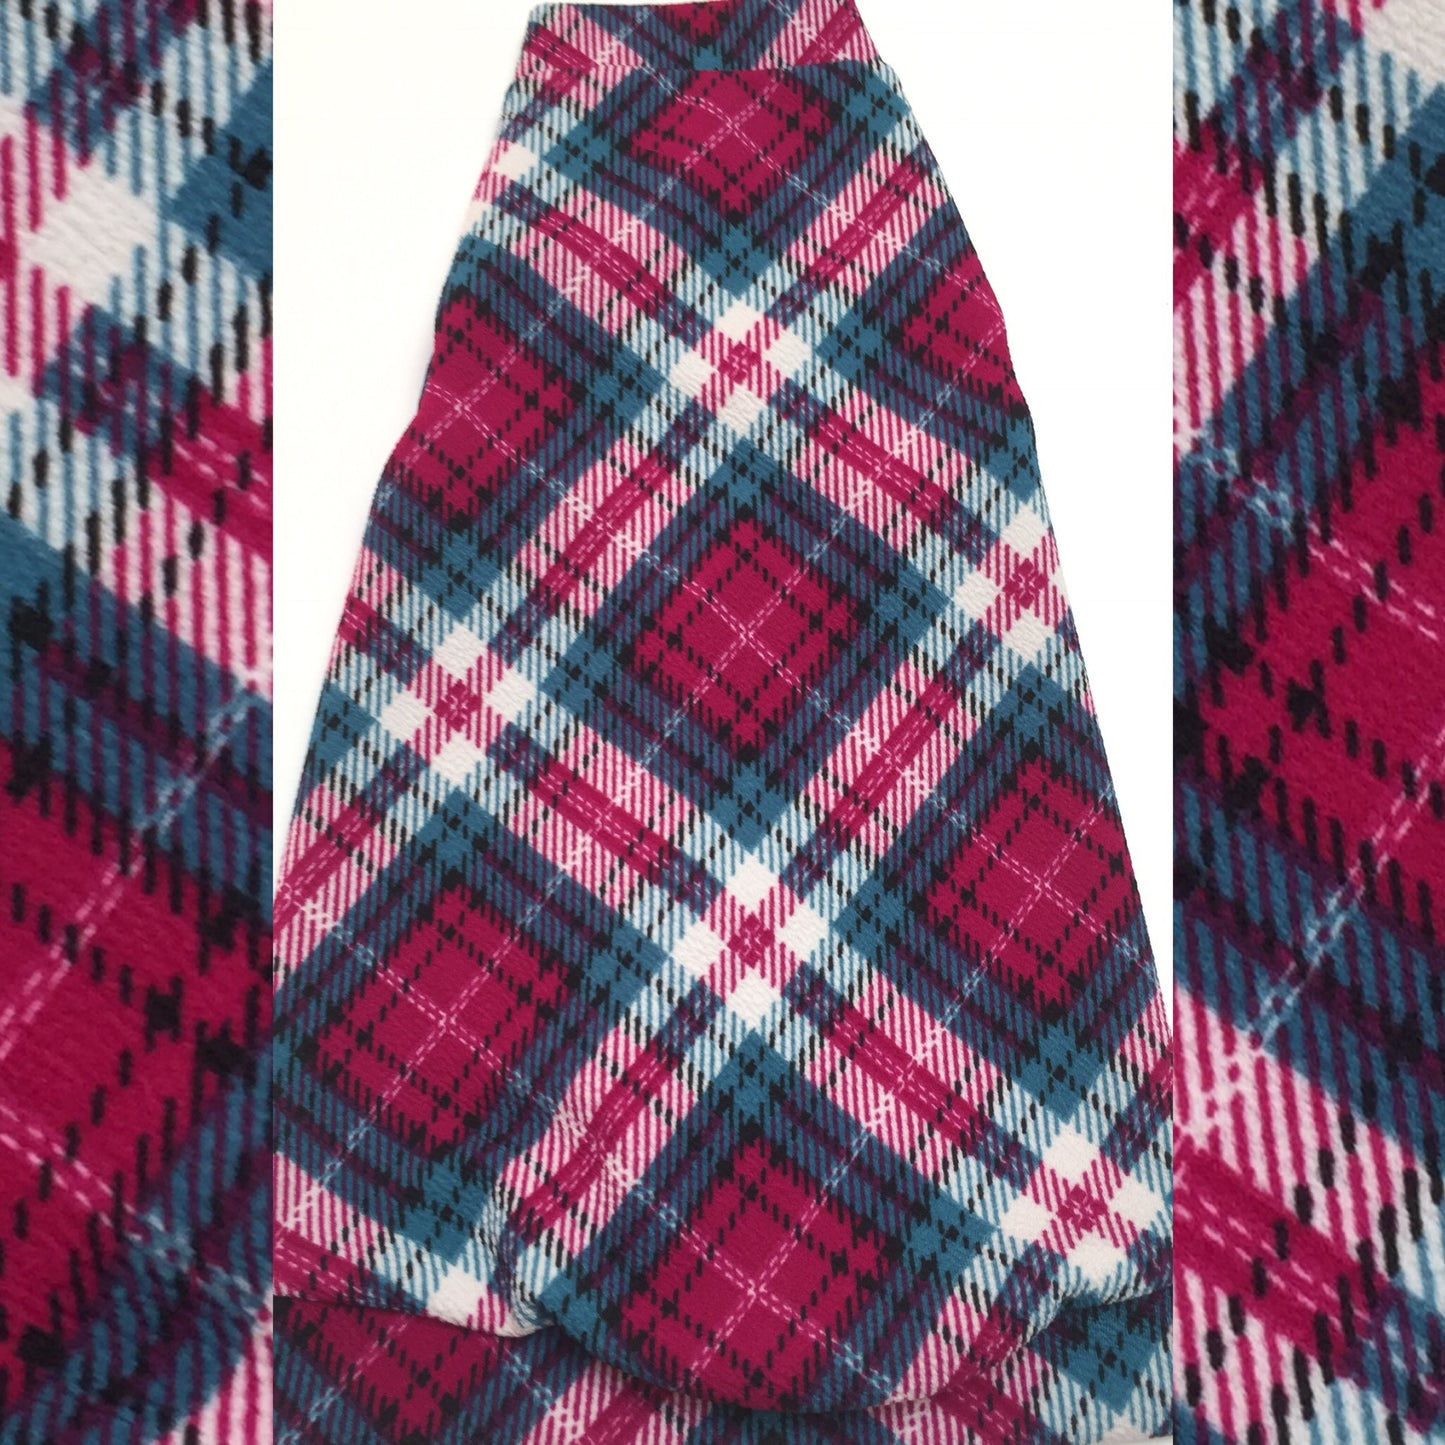 Argyle Plaid - Fuchsia and Teal - Nudie Patooties  Sphynx cat clothes for your sphynx cat, sphynx kitten, Donskoy, Bambino Cat, cornish rex, peterbald and devon rex cat. 